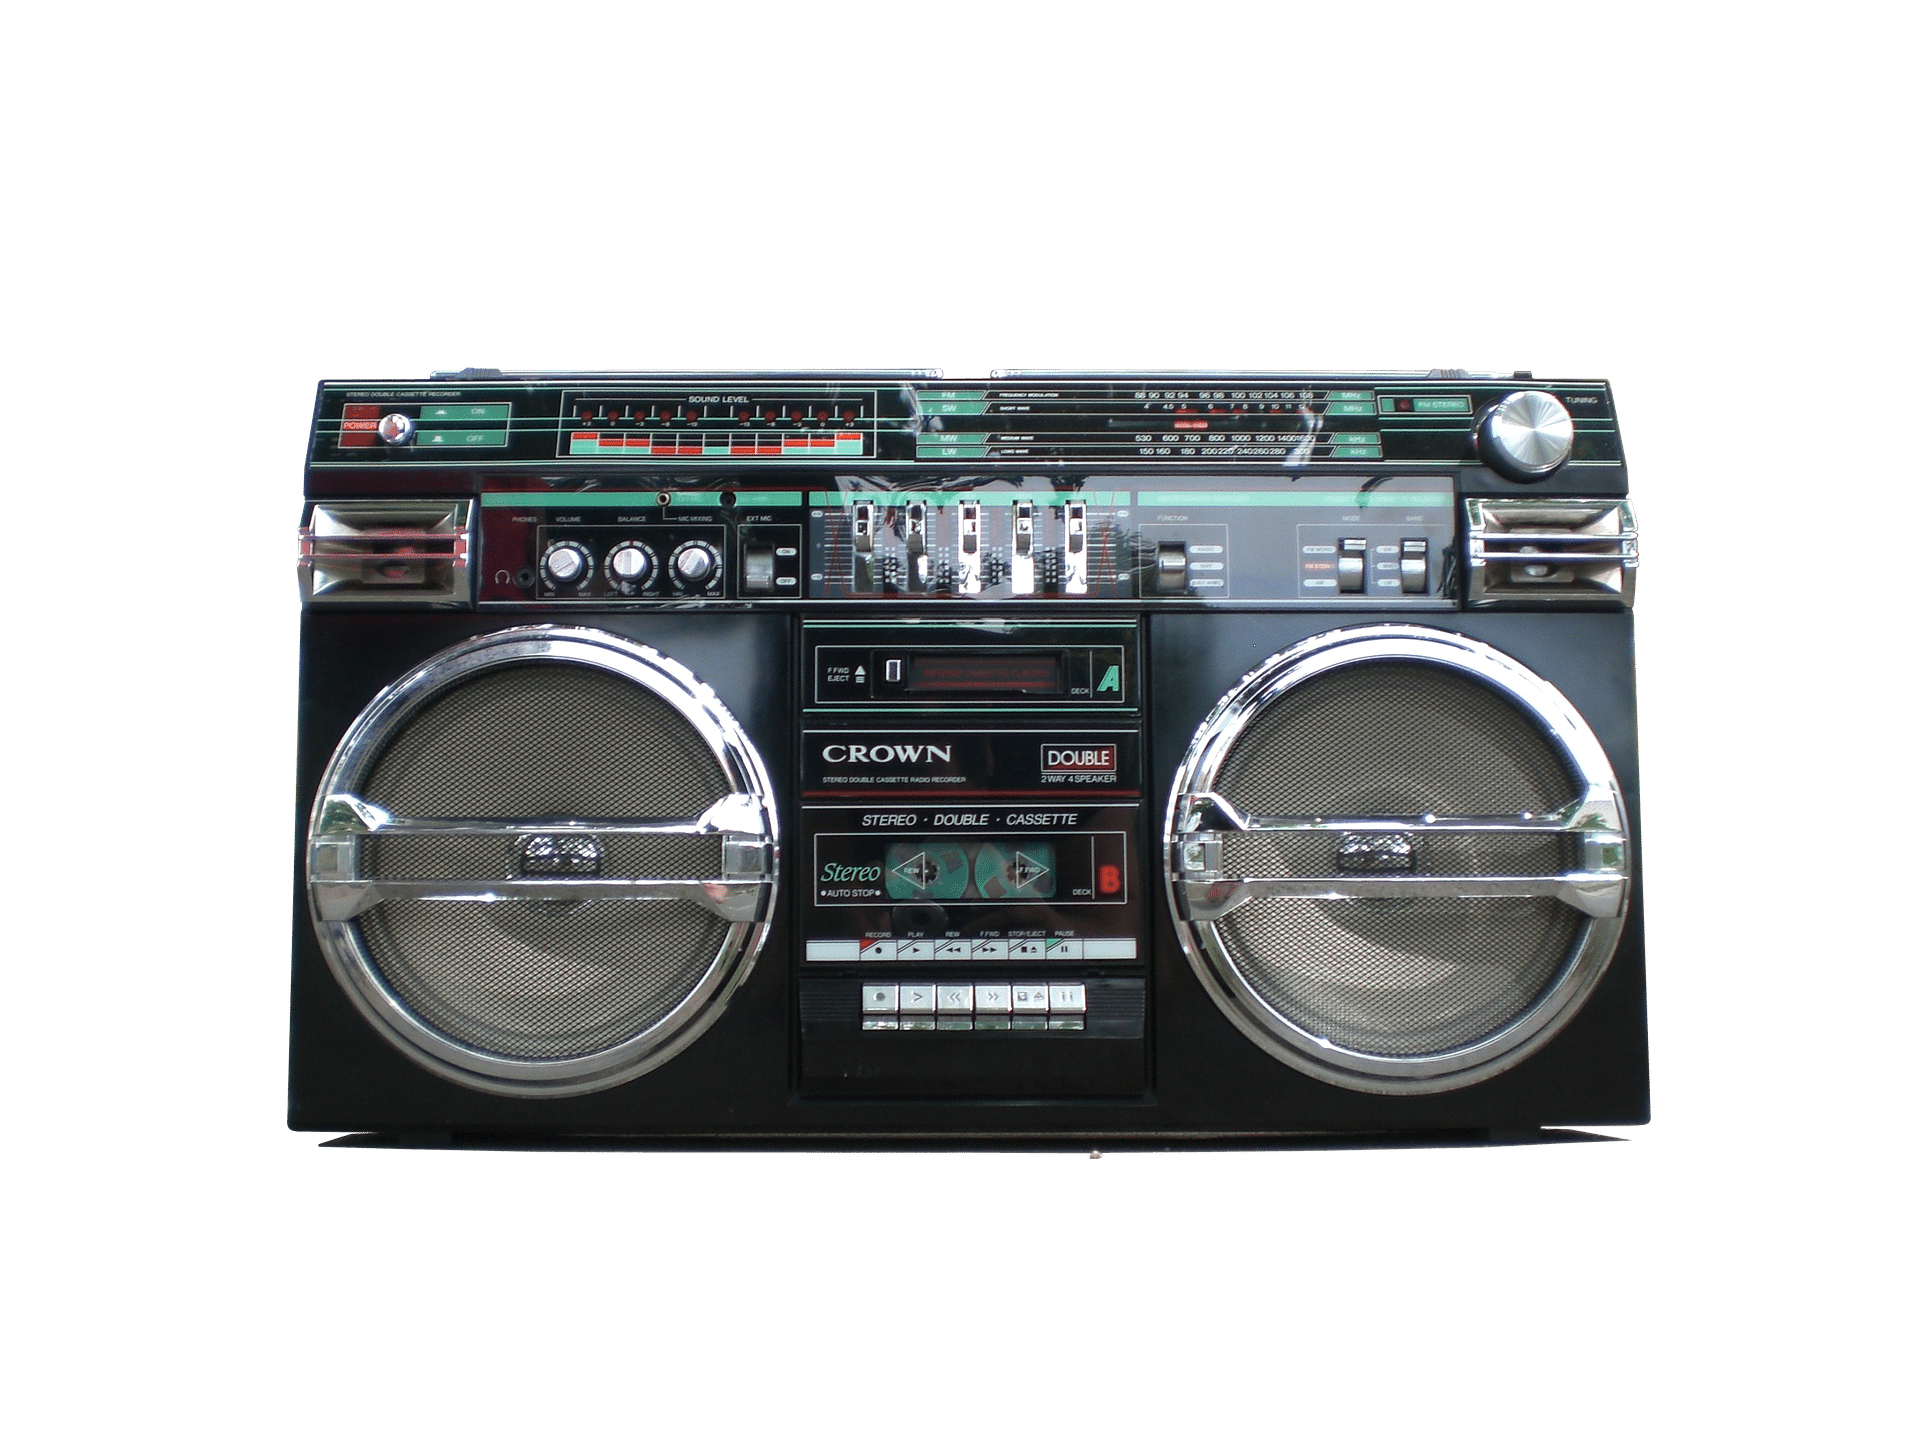 A Boombox - Listening to INXS 80's Style perhaps?